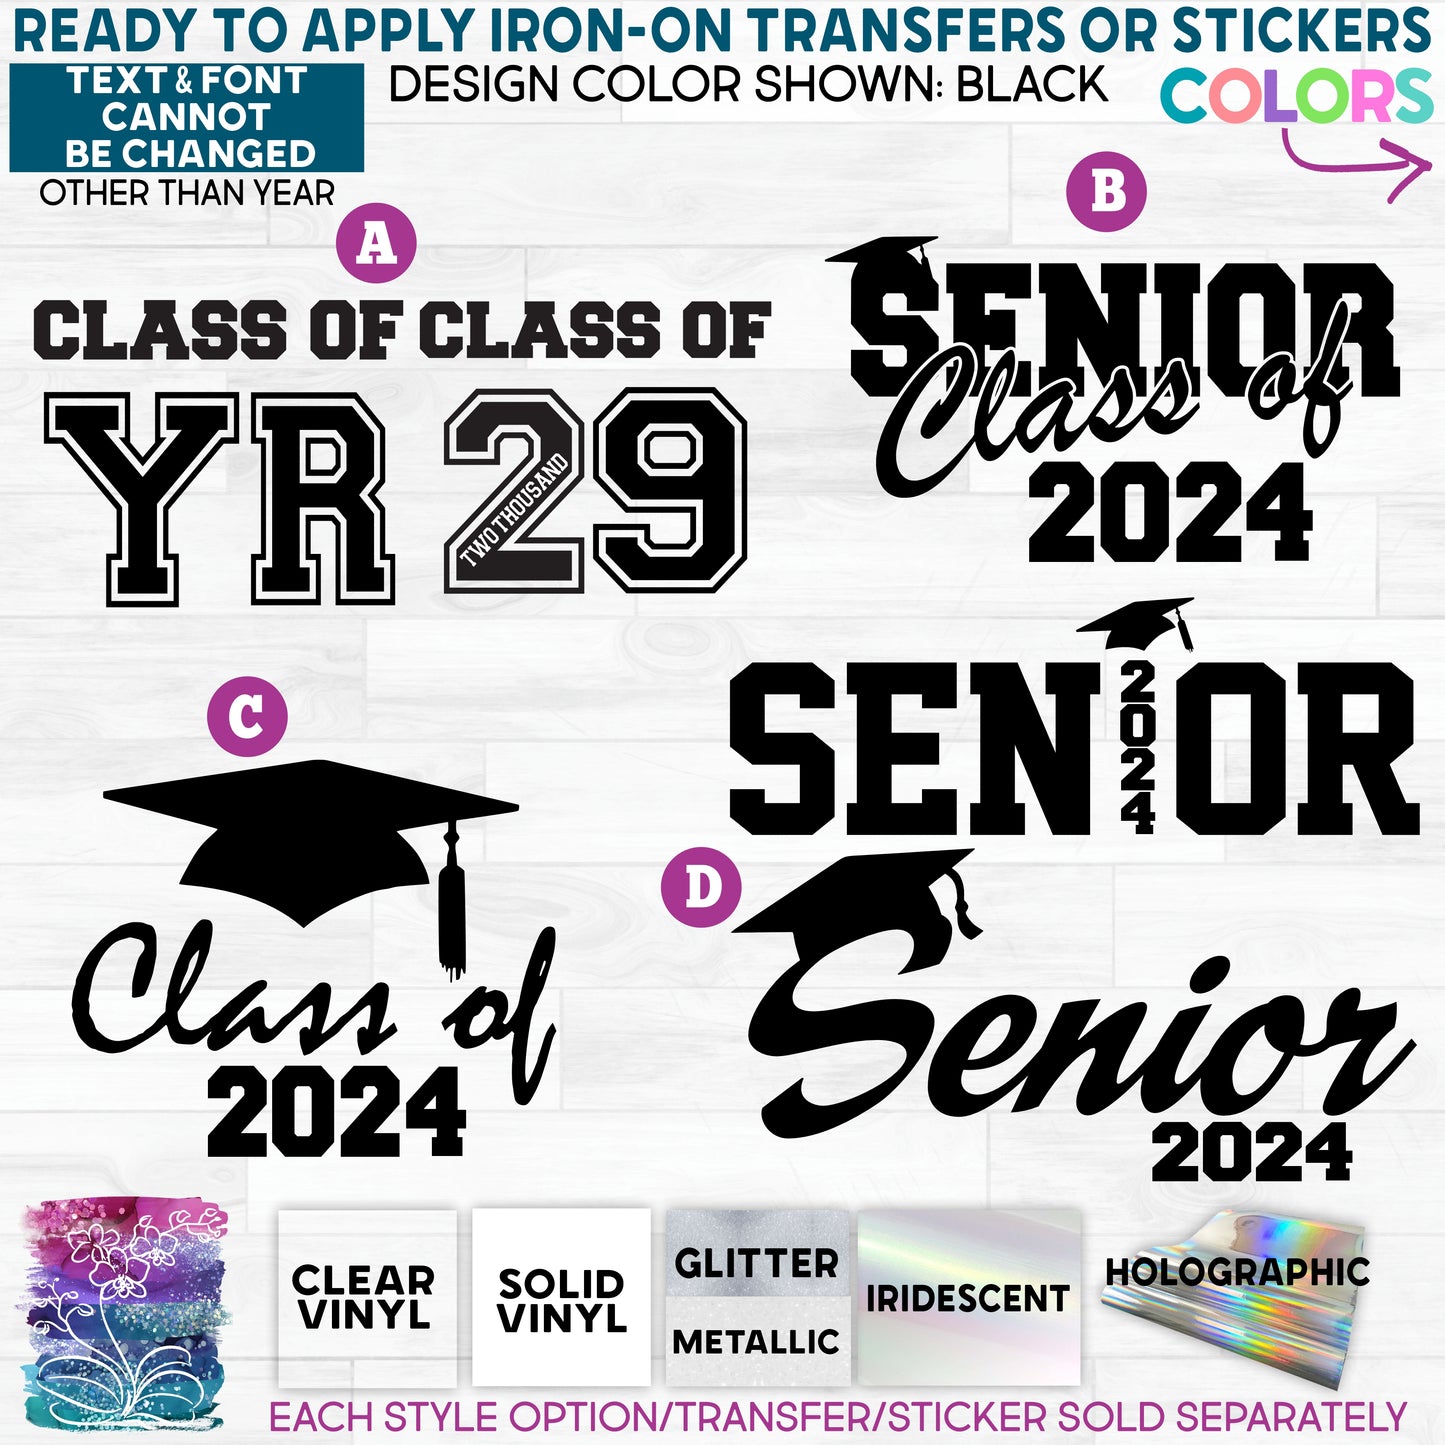 (s151-1) Graduation Senior Grad Class of Any Year Available Glitter or Vinyl Iron-On Transfer or Sticker